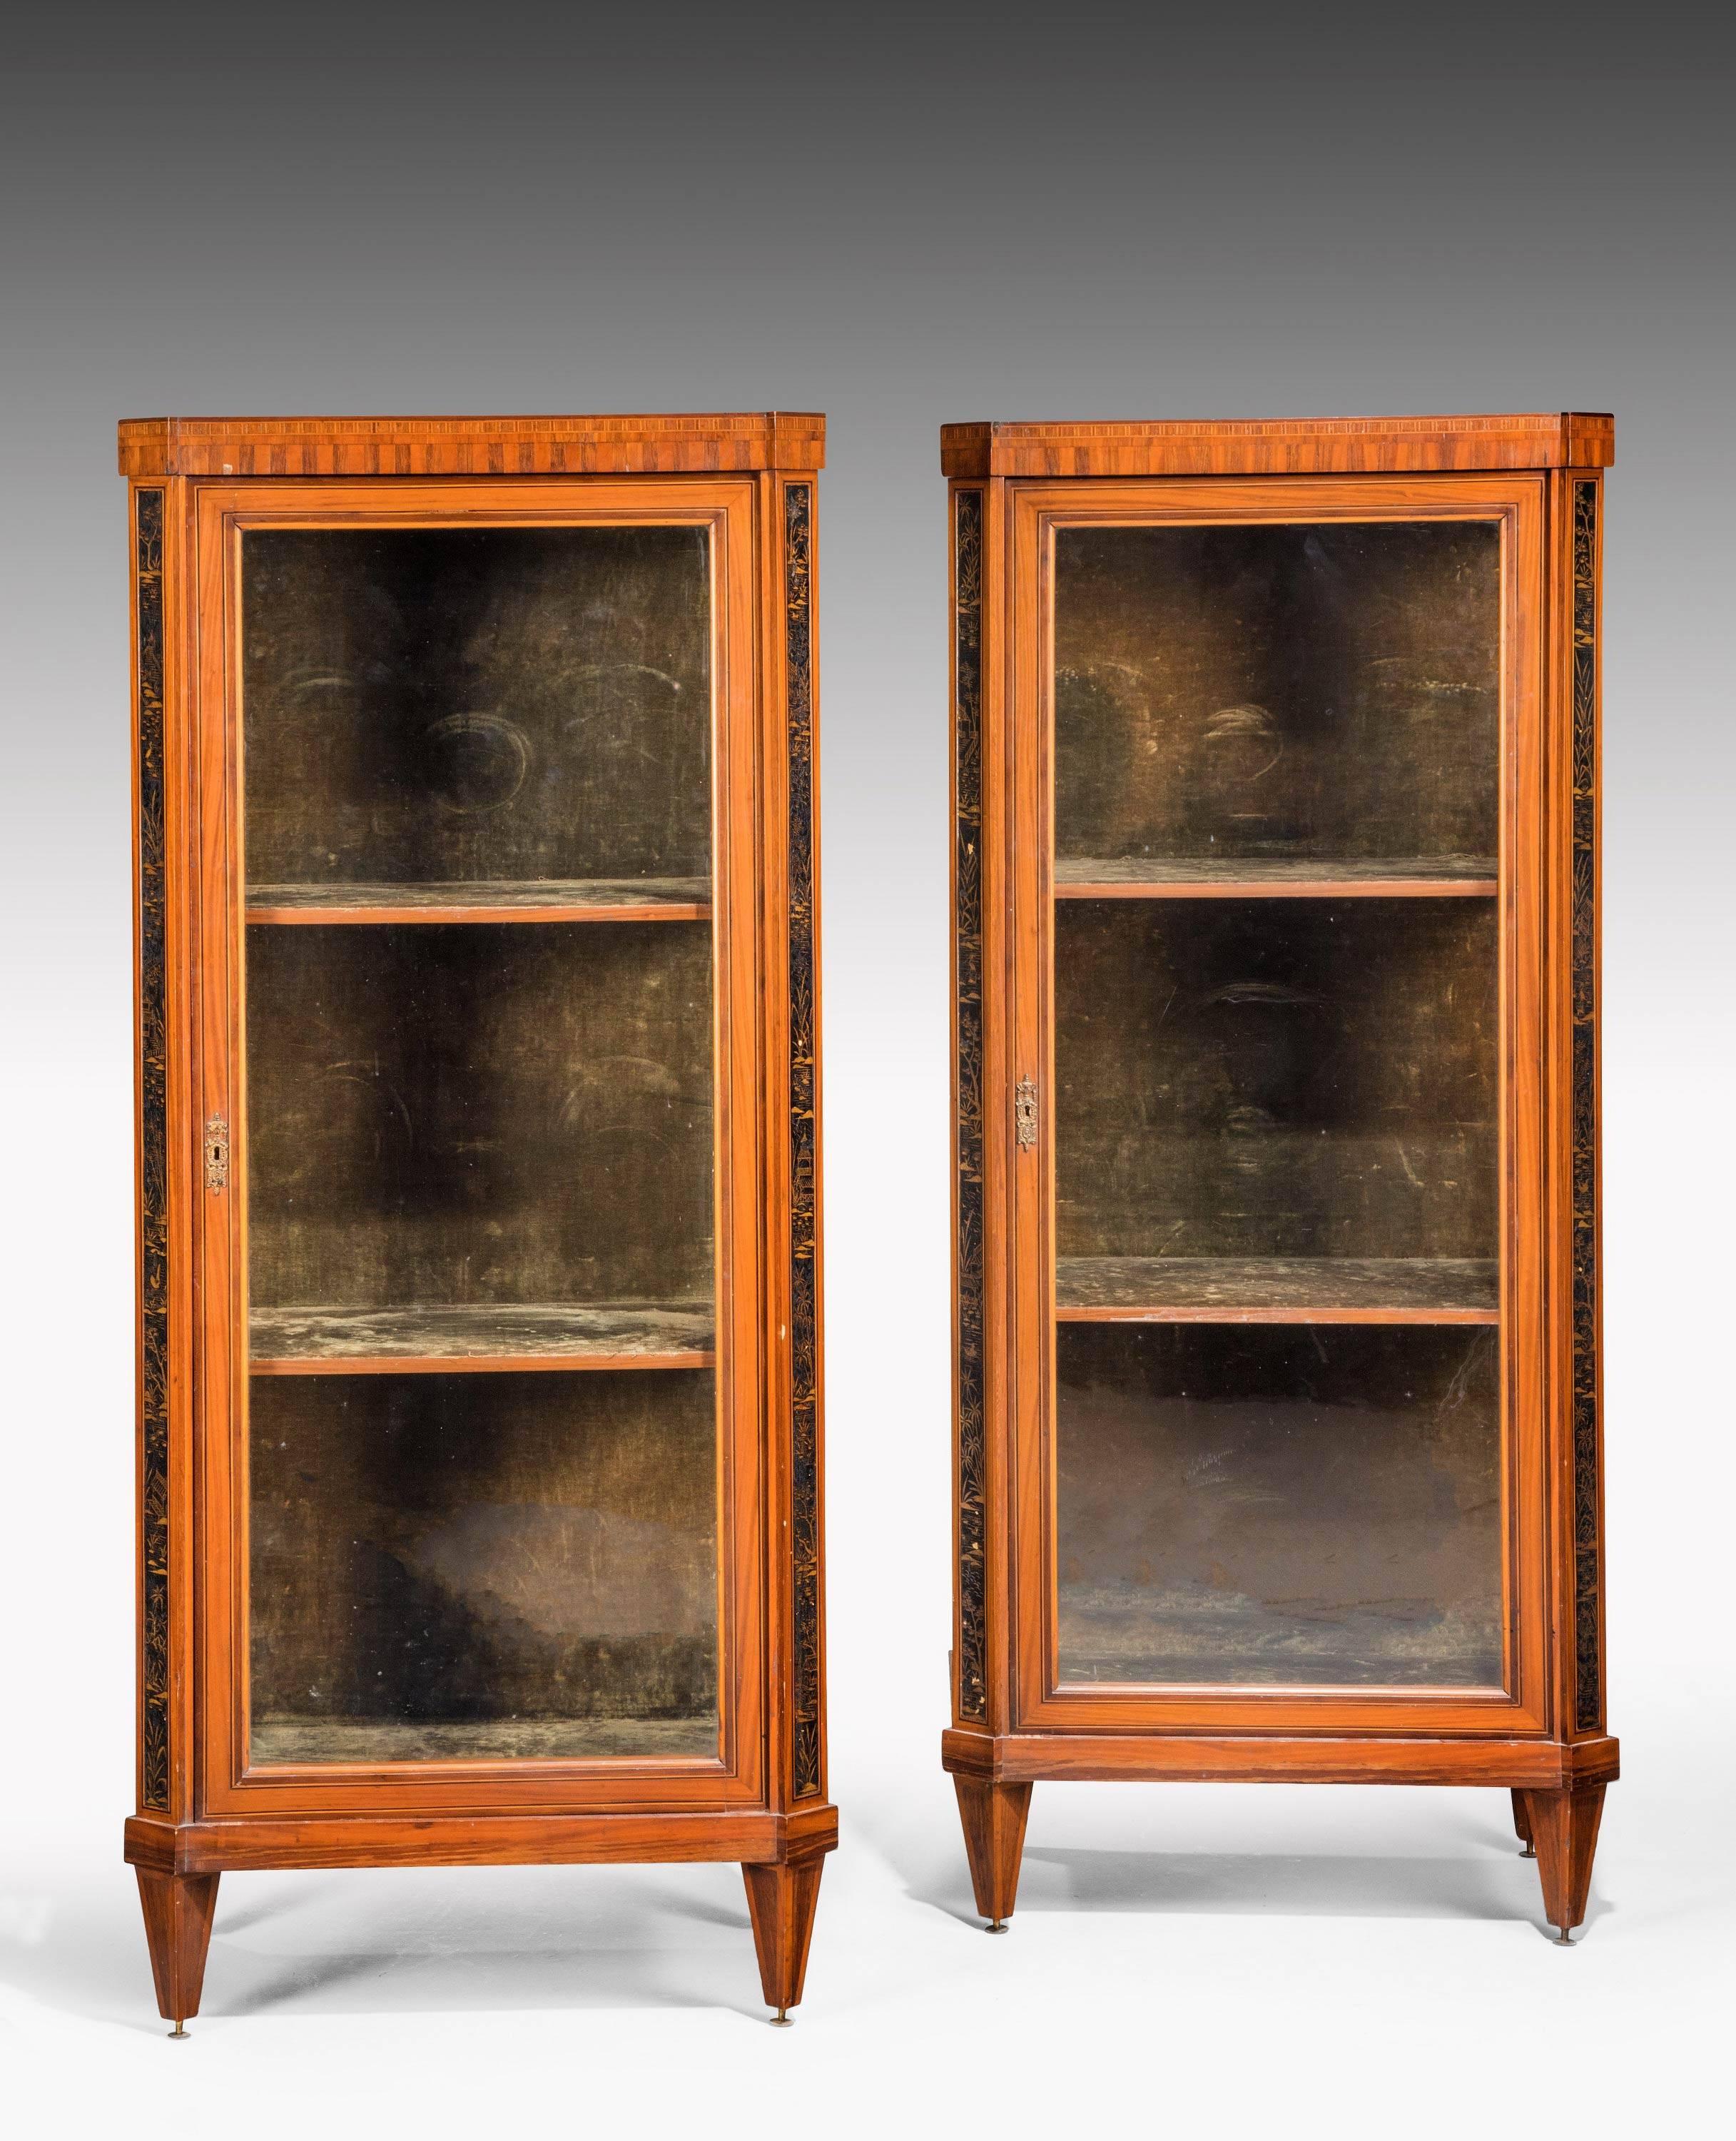 A pair of mid-19th century French Satinwood, black lacquer and gilt japanned Display cabinets in Louis XVI style. Each chequered frieze above the glass panelled door opening to a shelved interior, cornered by slender black lacquer pilasters